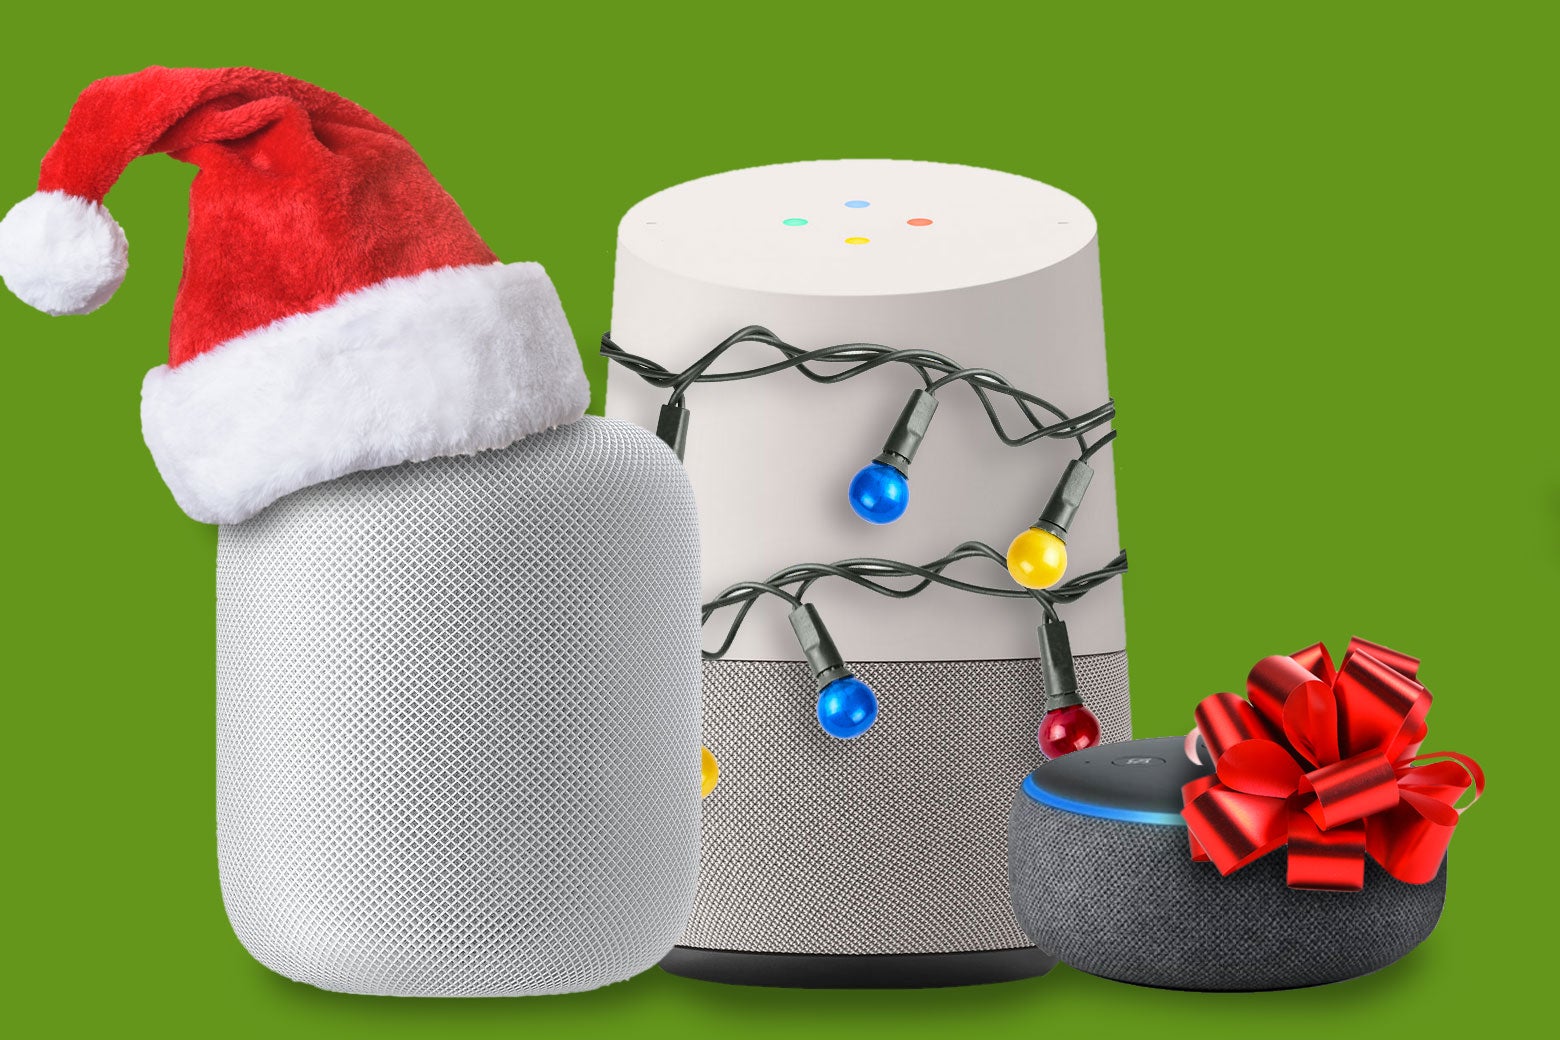 Smart speakers all decked out for Christmas.